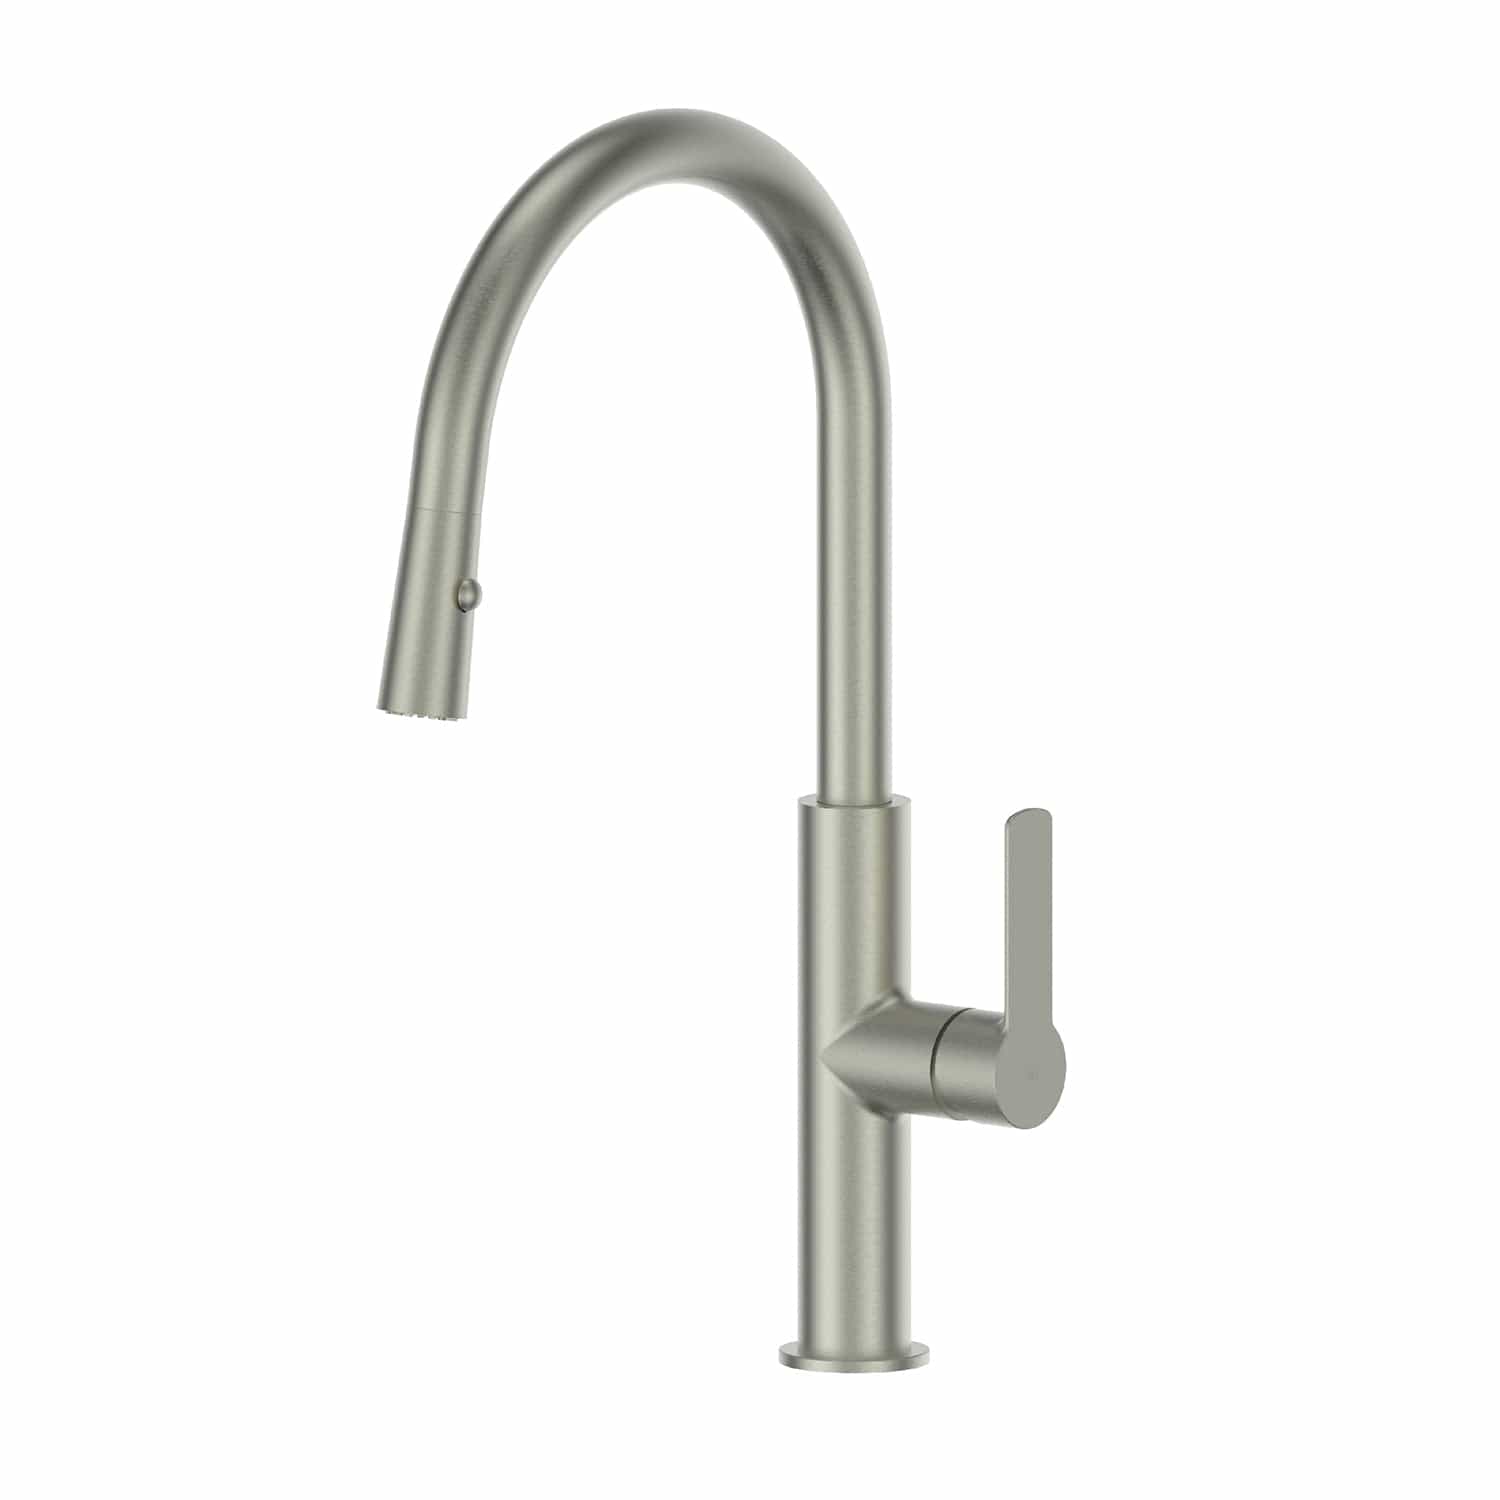 Greens Kitchen Tap Greens Astro II Pull Down Sink Mixer | Brushed Nickel